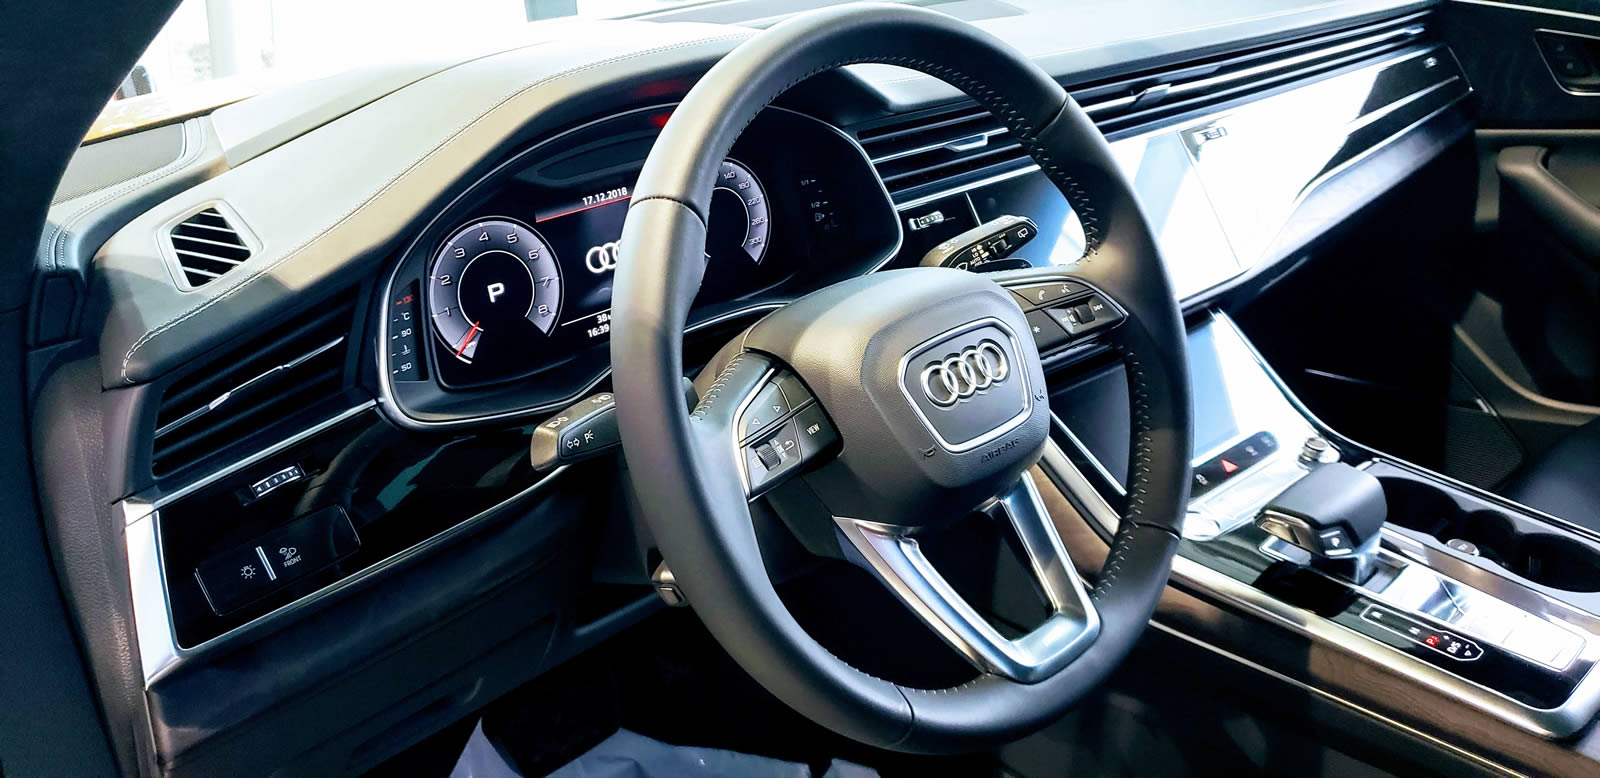 Test Driving the All-new Audi Q8 in Montreal: Dashboard